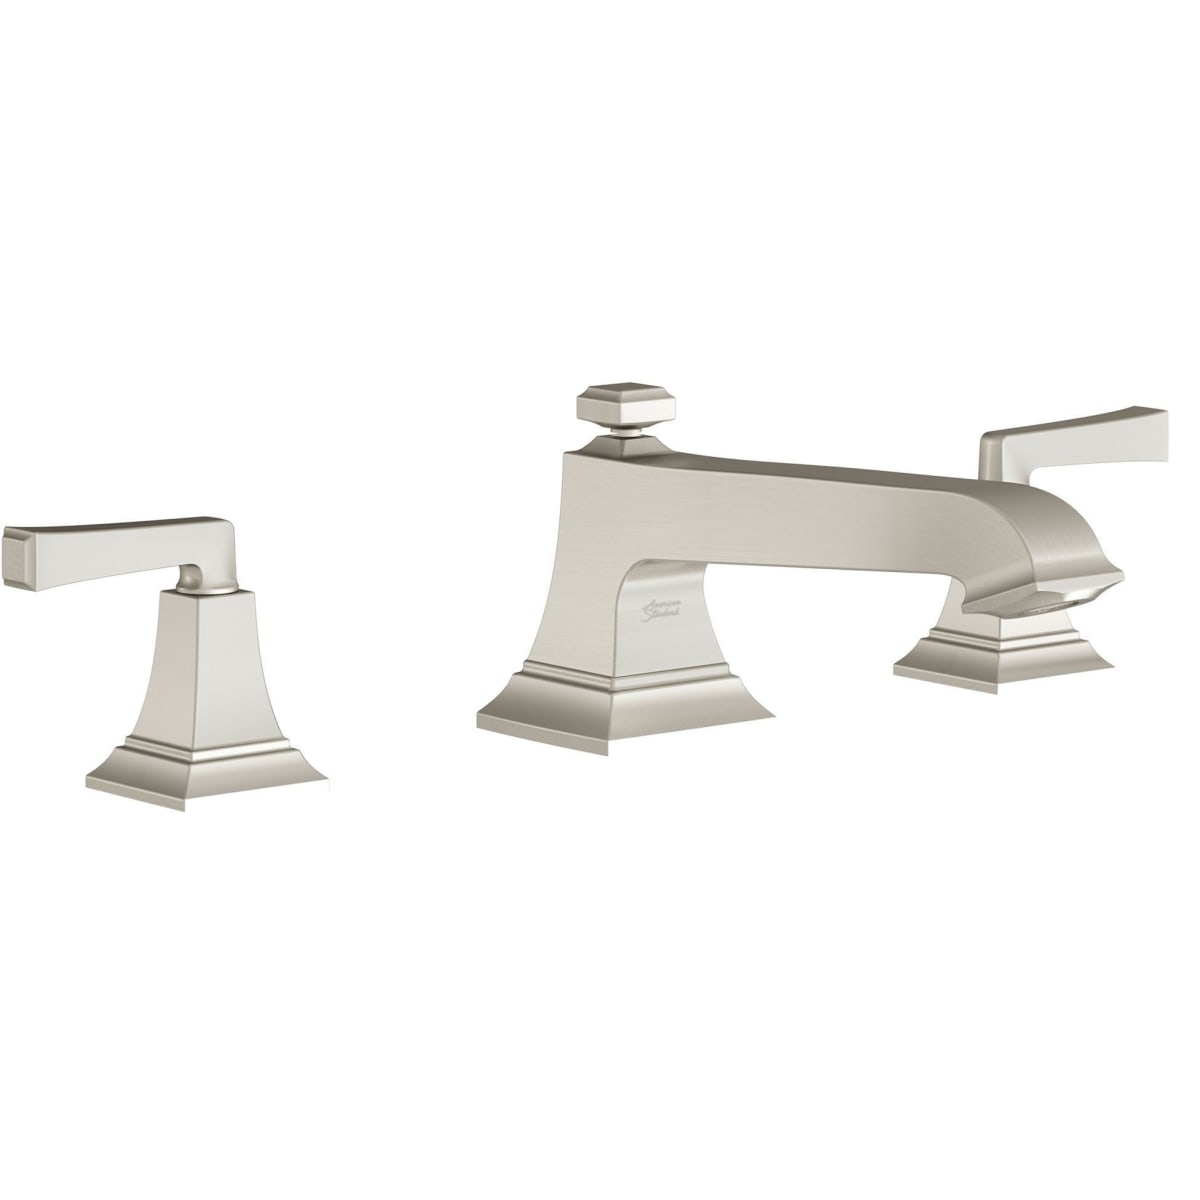 American Standard T455901.002 Town Square S Roman Tub Faucet with Personal Shower Polished Chrome